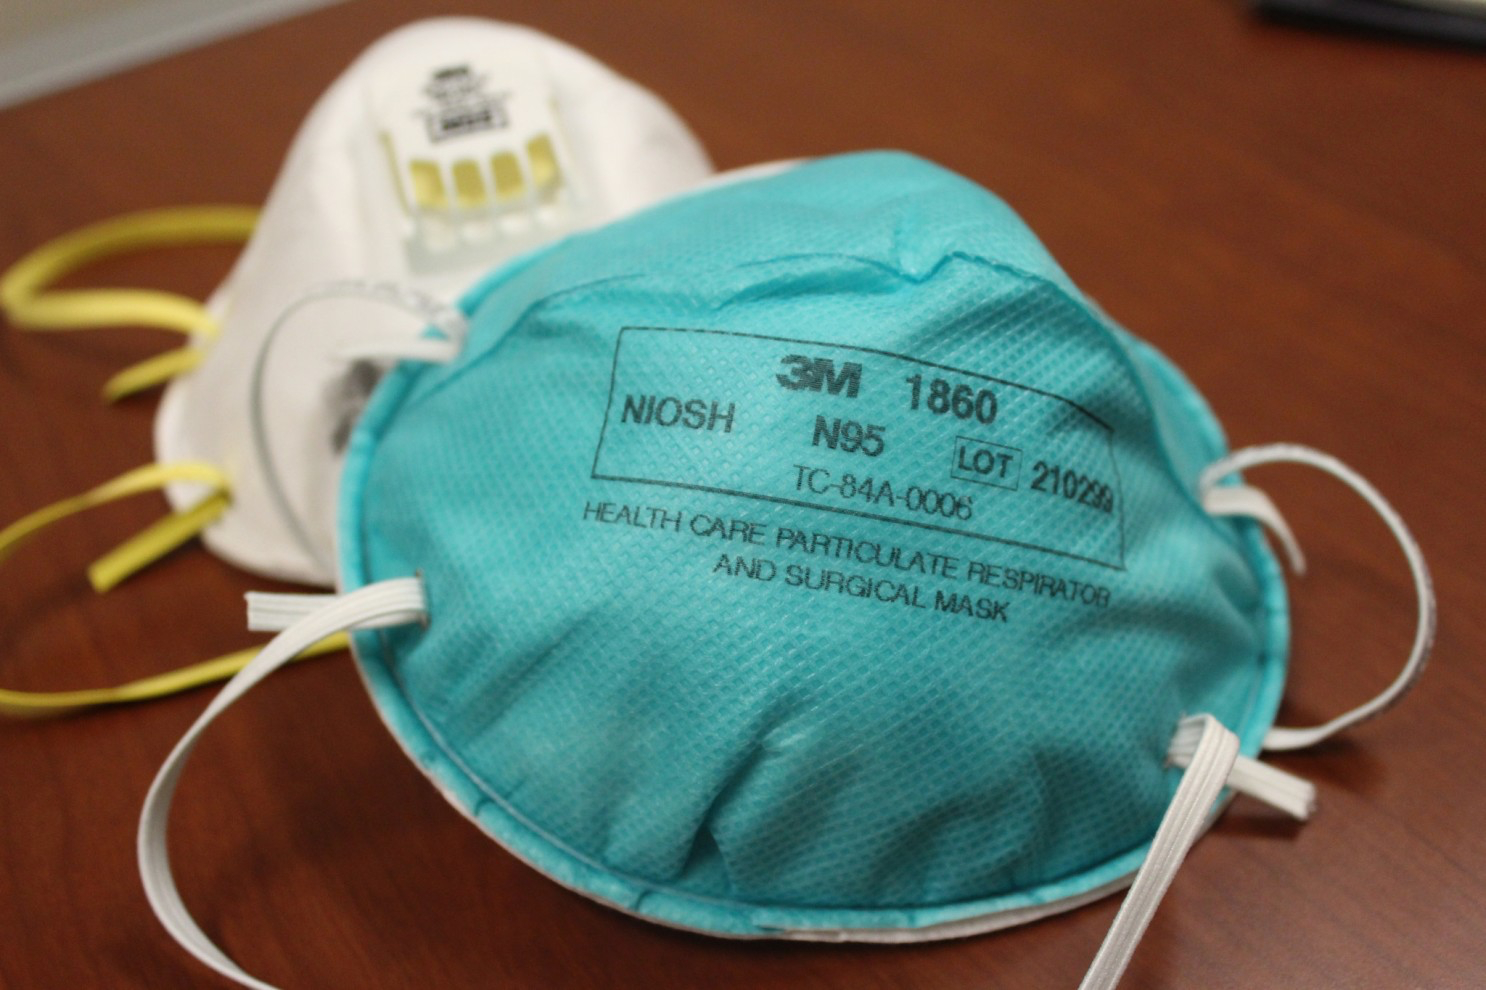 Va. DOC manufacturing sneeze/cough guard masks for staff, offenders